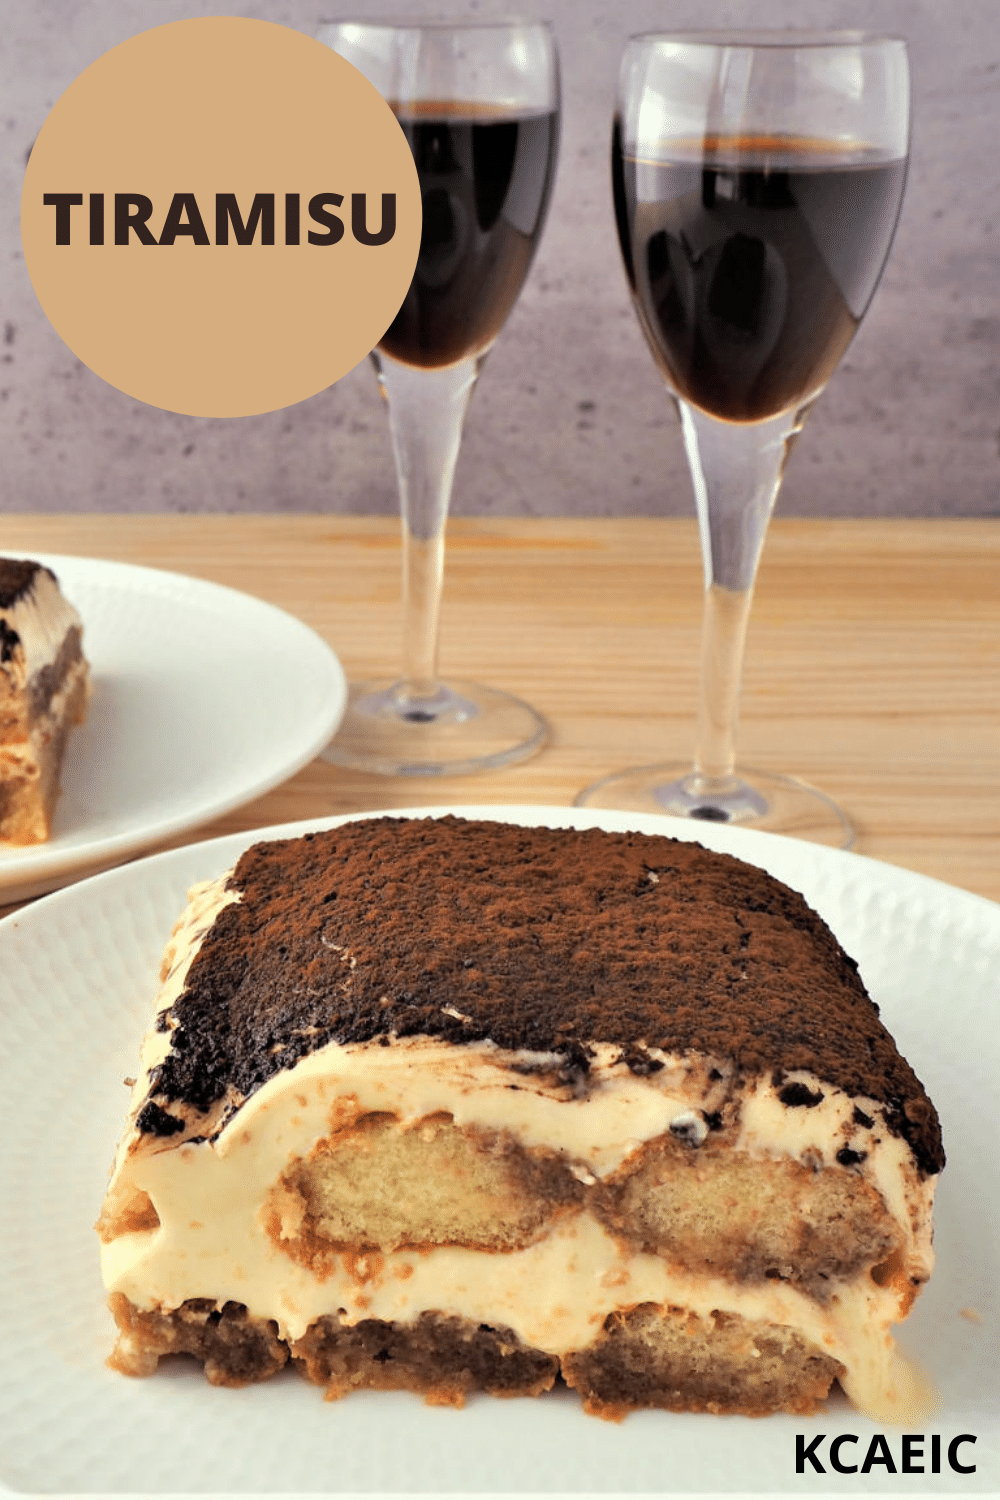 tiramisu on white plate with two small glasses of marsala wine, with a second serve in the background, with text overlay, tiramisu and KCAEIC.